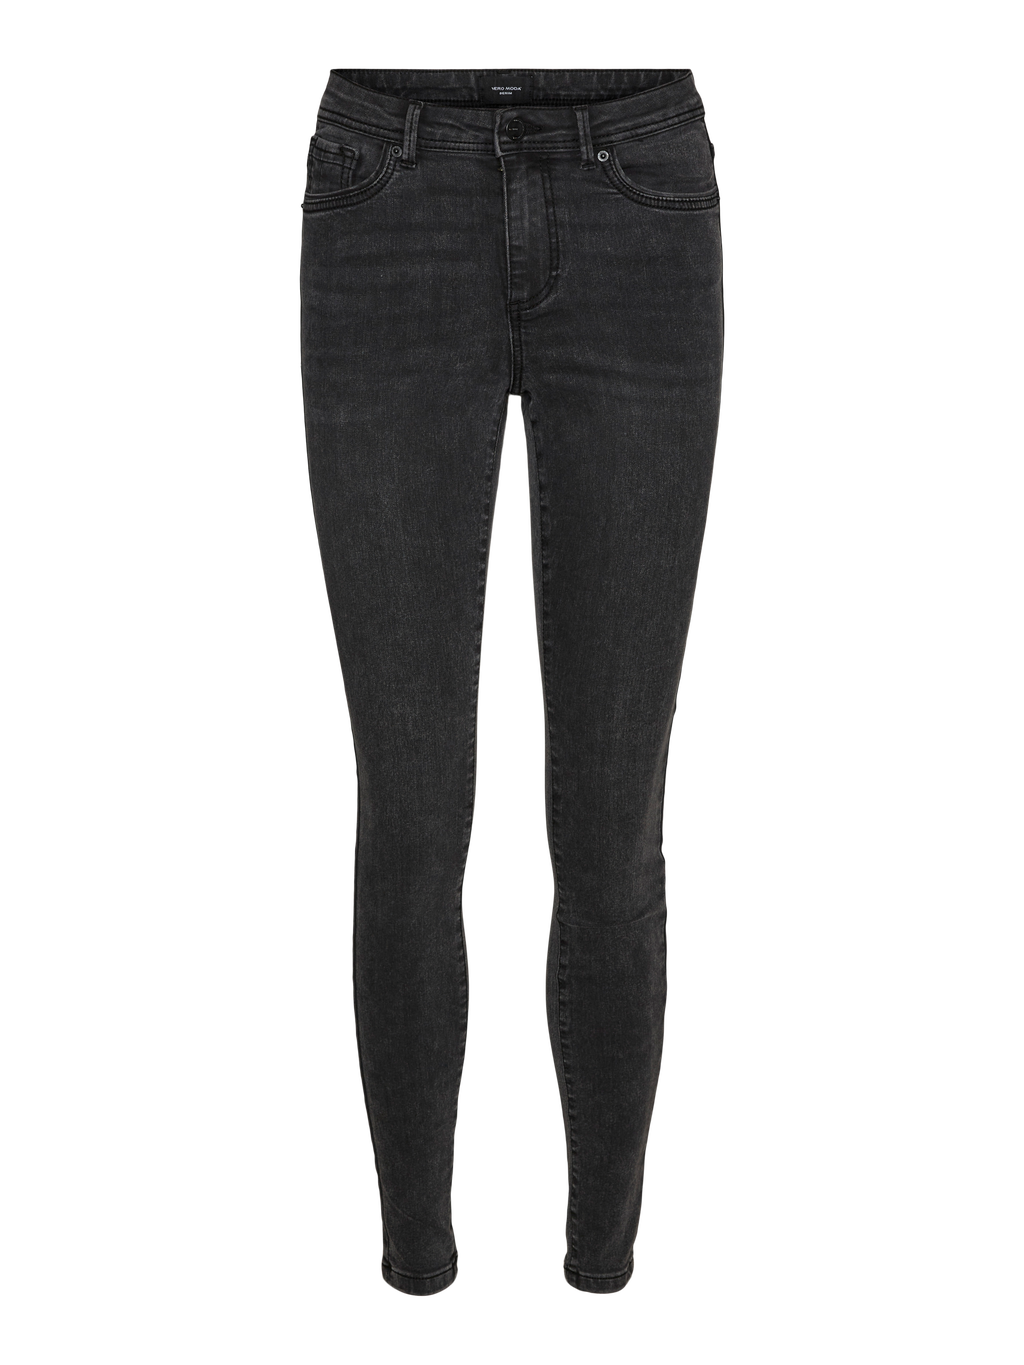 Skinny Fit Jeans with 20% discount! | Vero Moda®